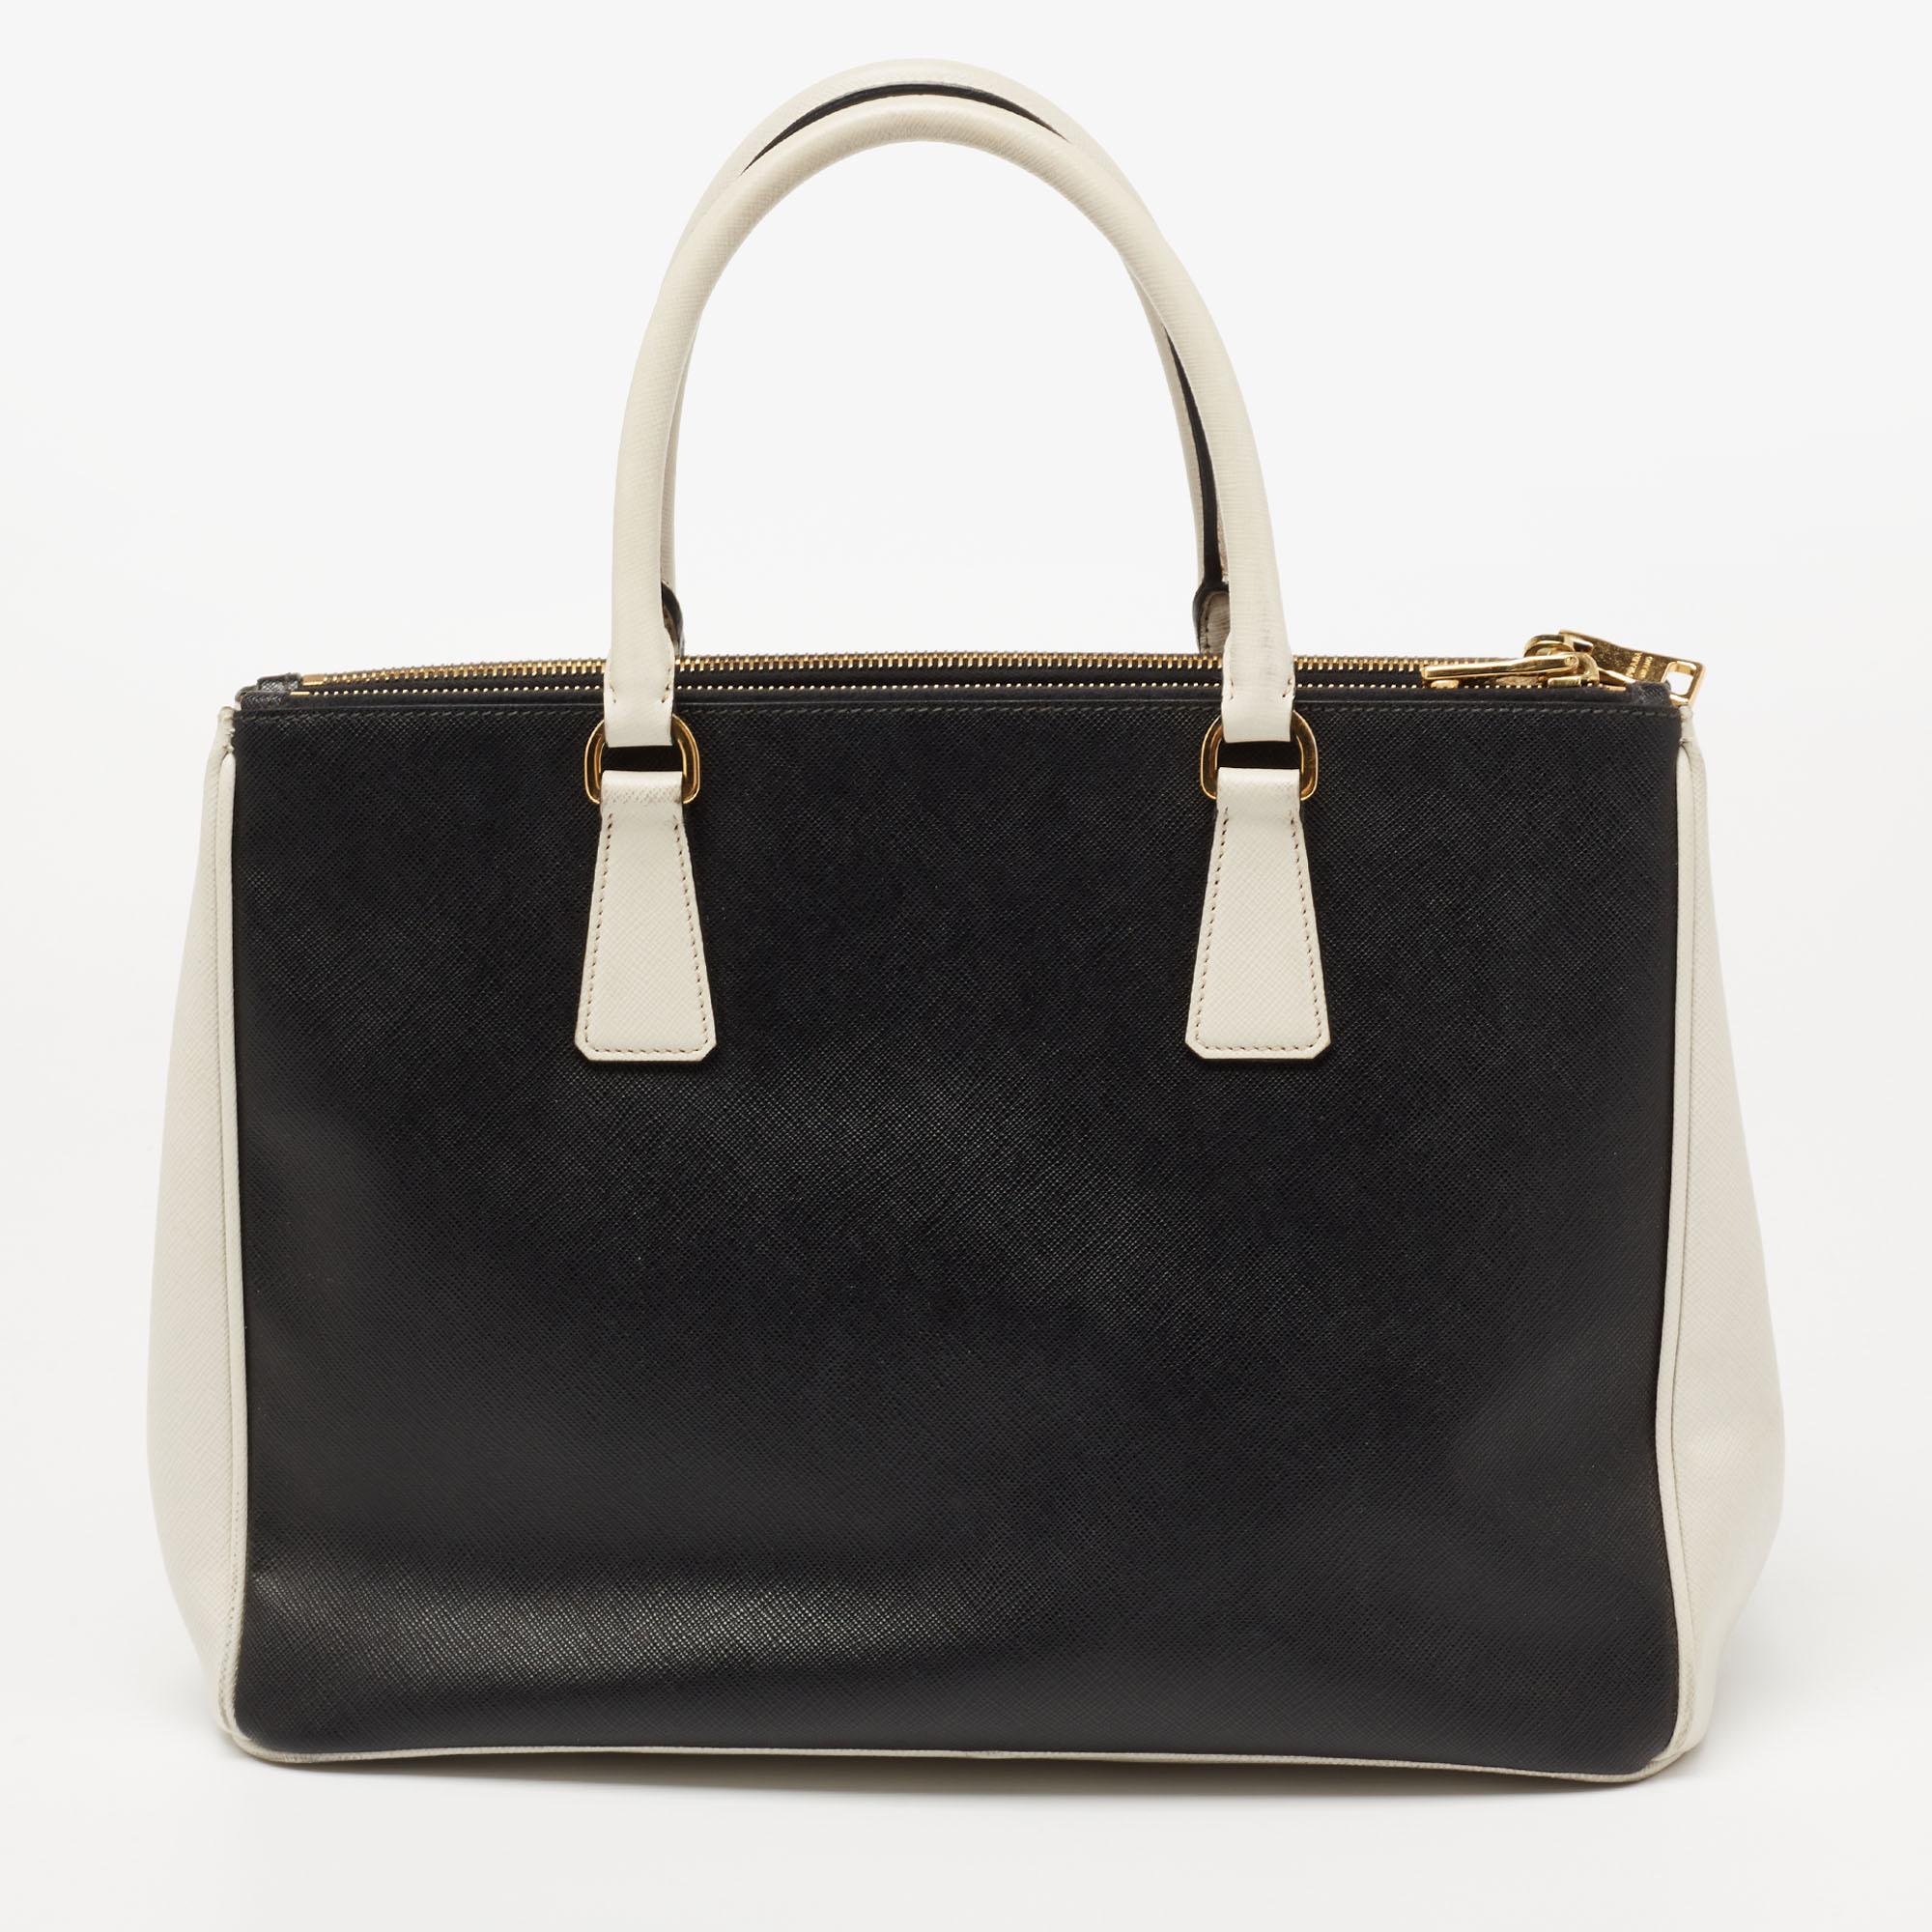 Grand in shape and design, this Double Zip tote by Prada will be a loved addition to your closet. It has been crafted from Saffiano Lux leather and styled minimally with gold-tone hardware. It comes with two top handles, two zip compartments, and